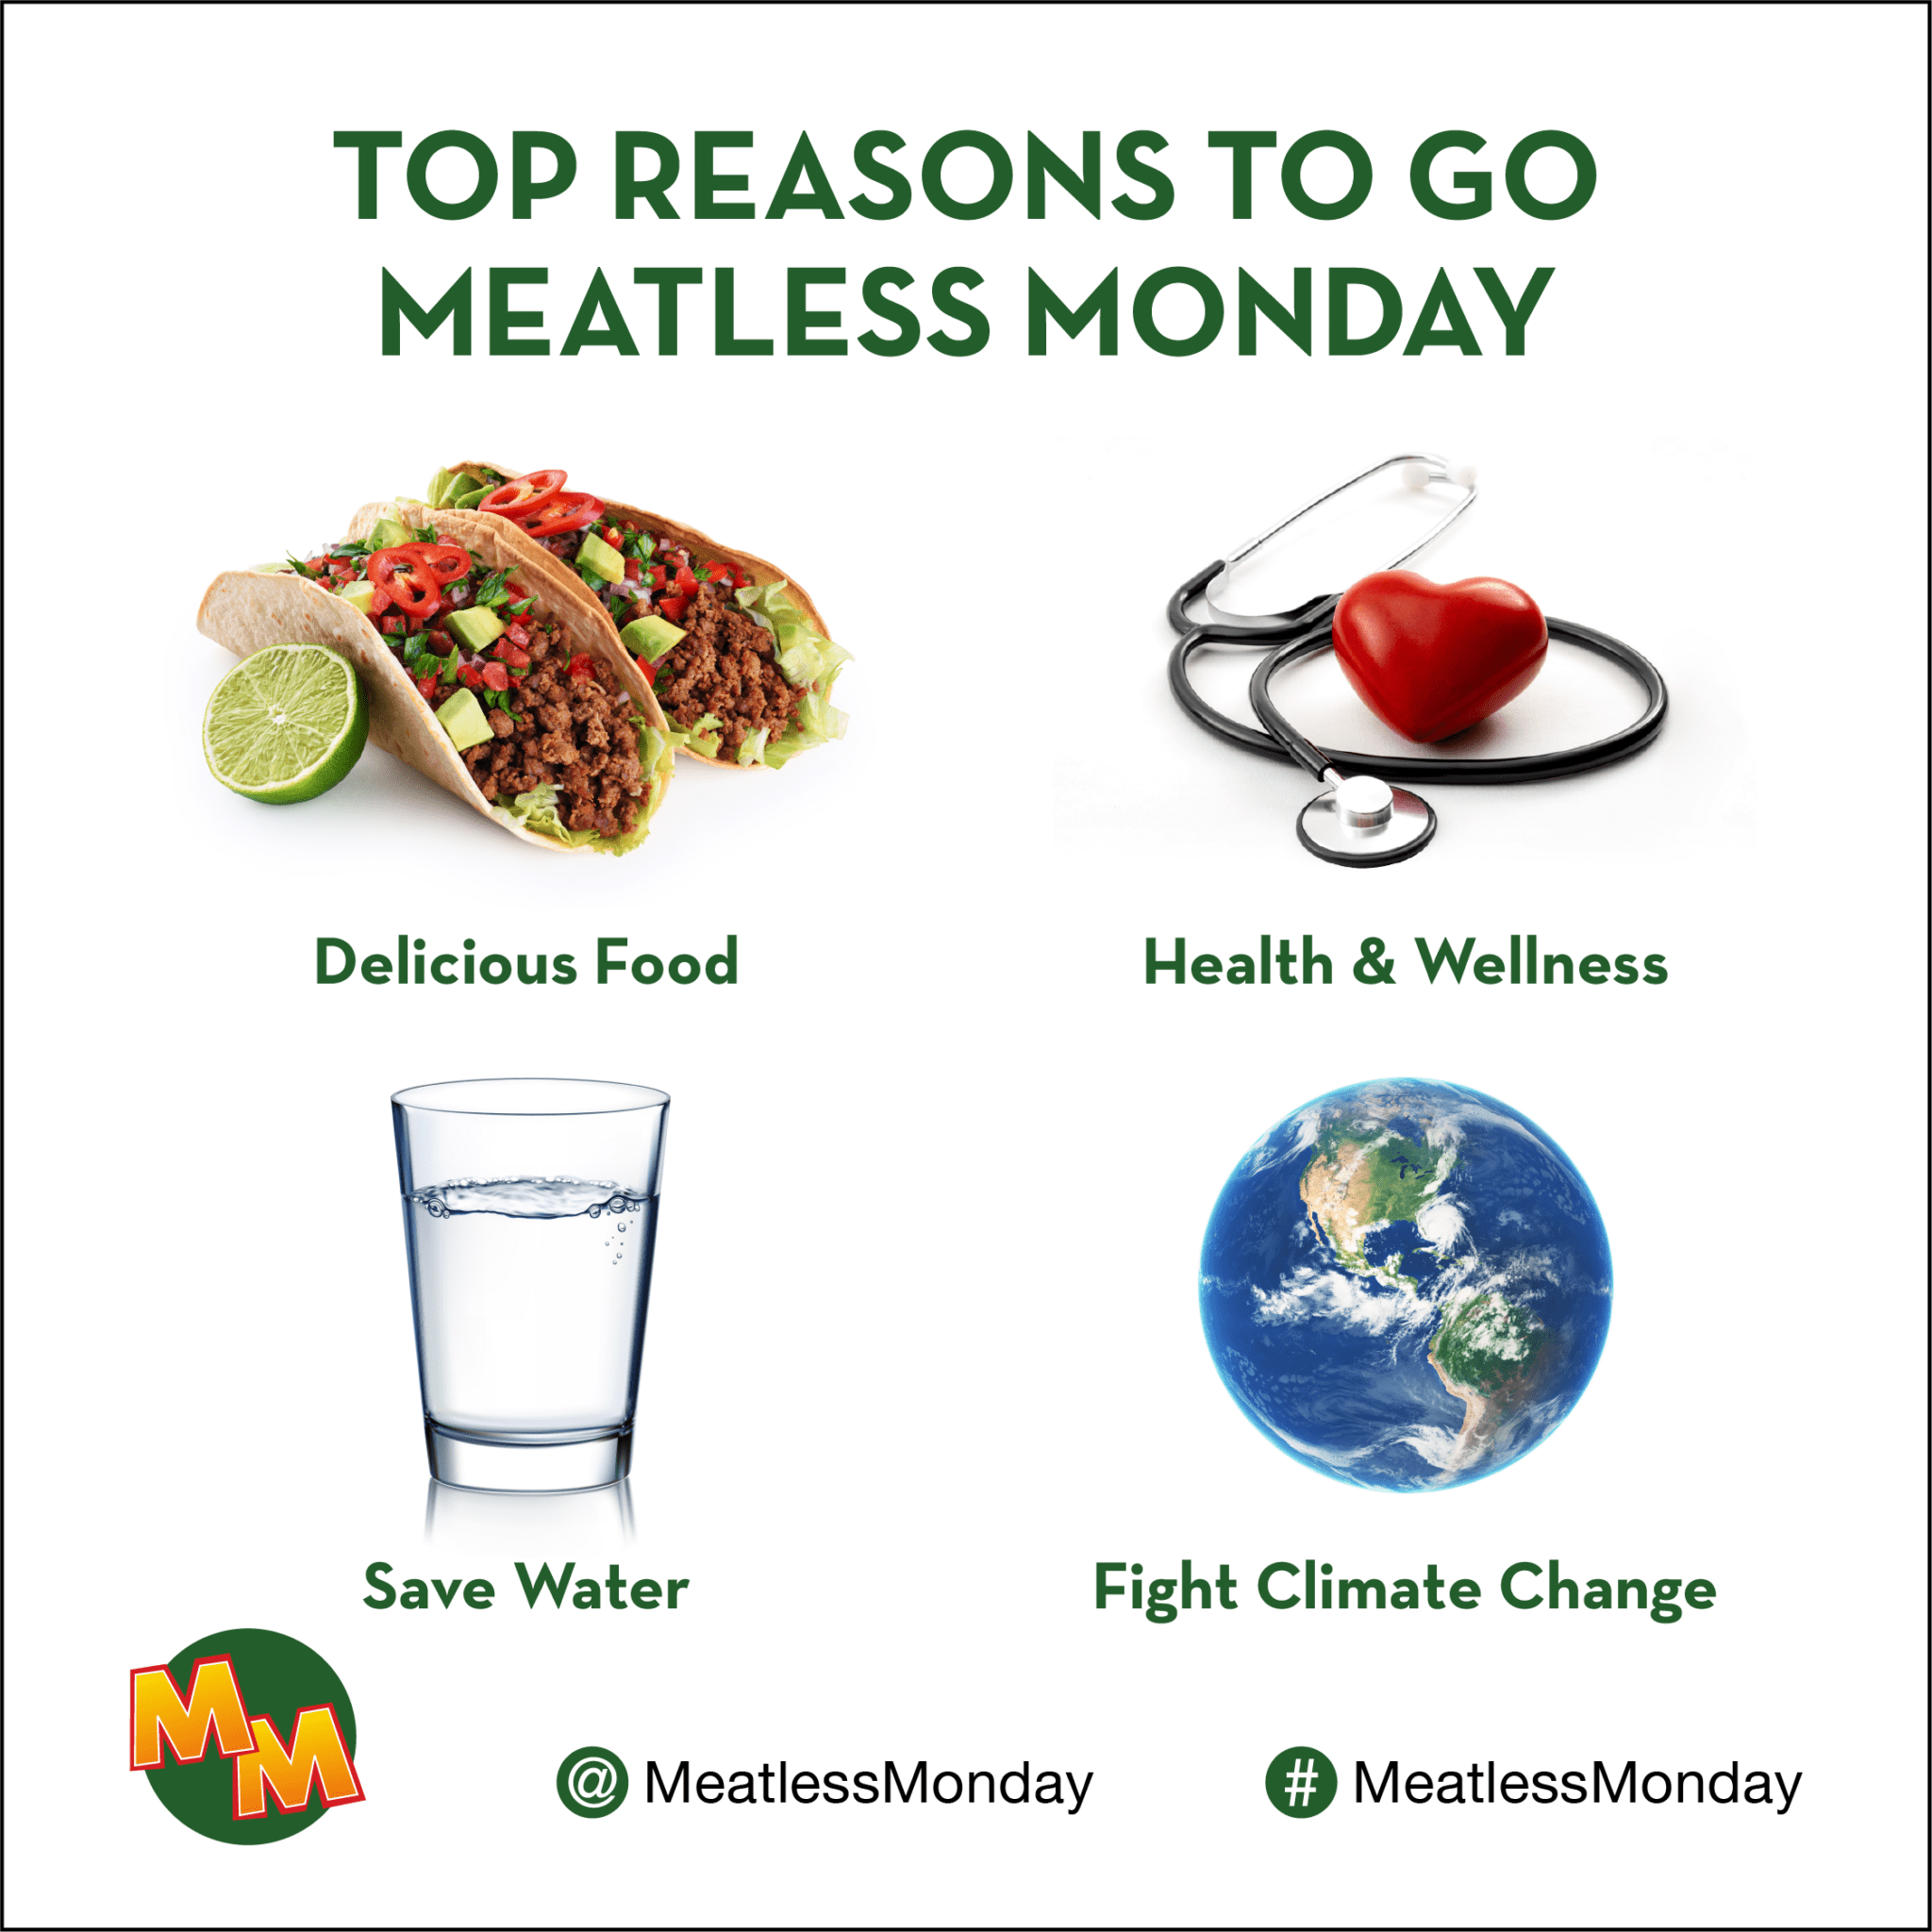 Get Started With Meatless Monday The Monday Campaigns 4515